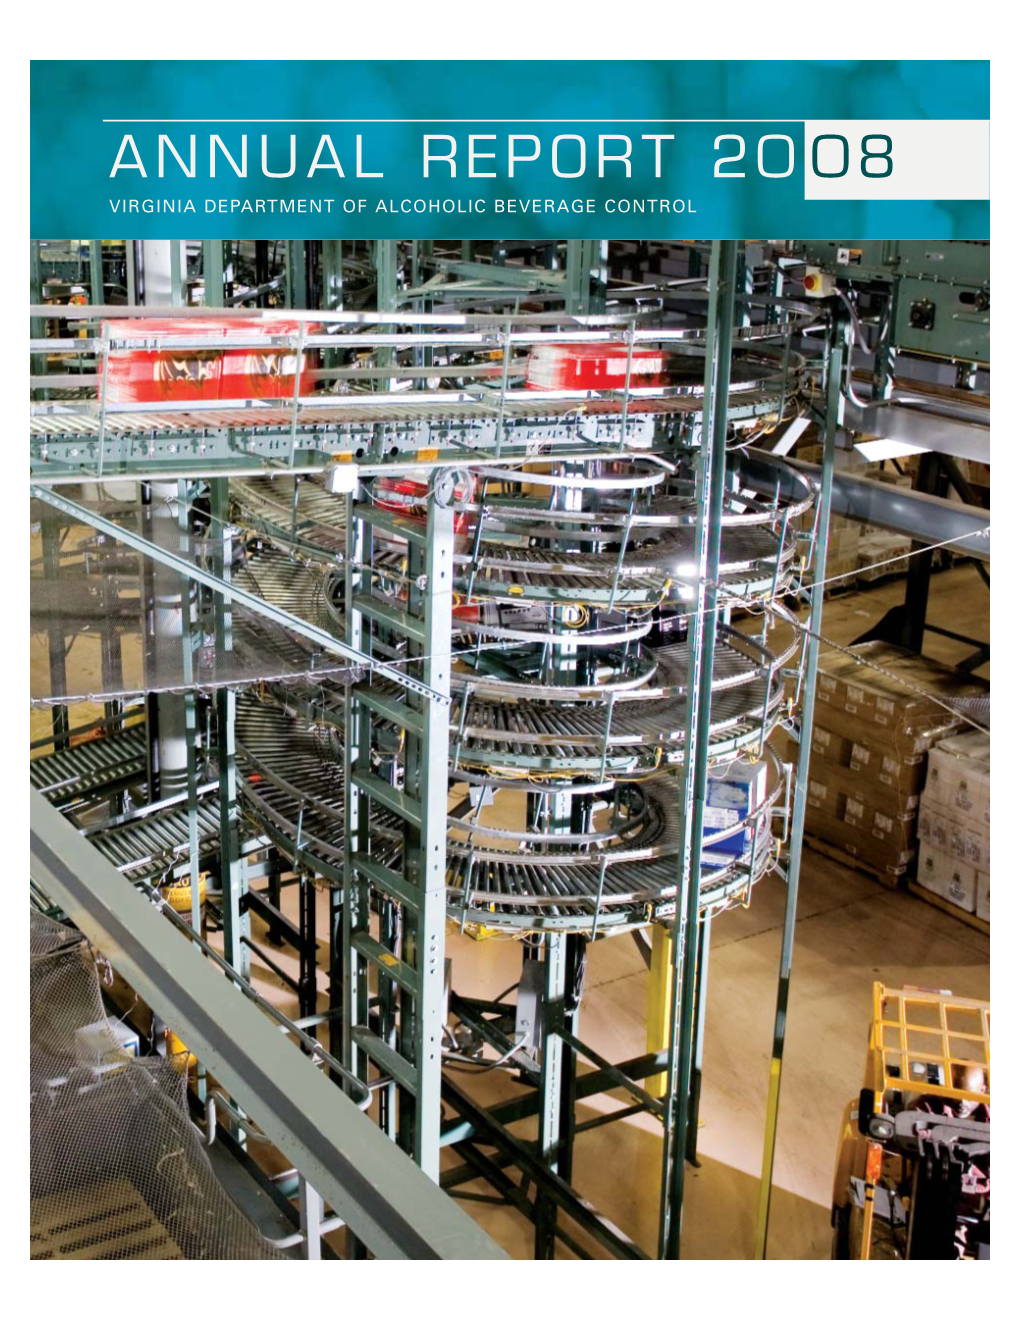 Department of Alcoholic Beverage Control Annual Report 2008